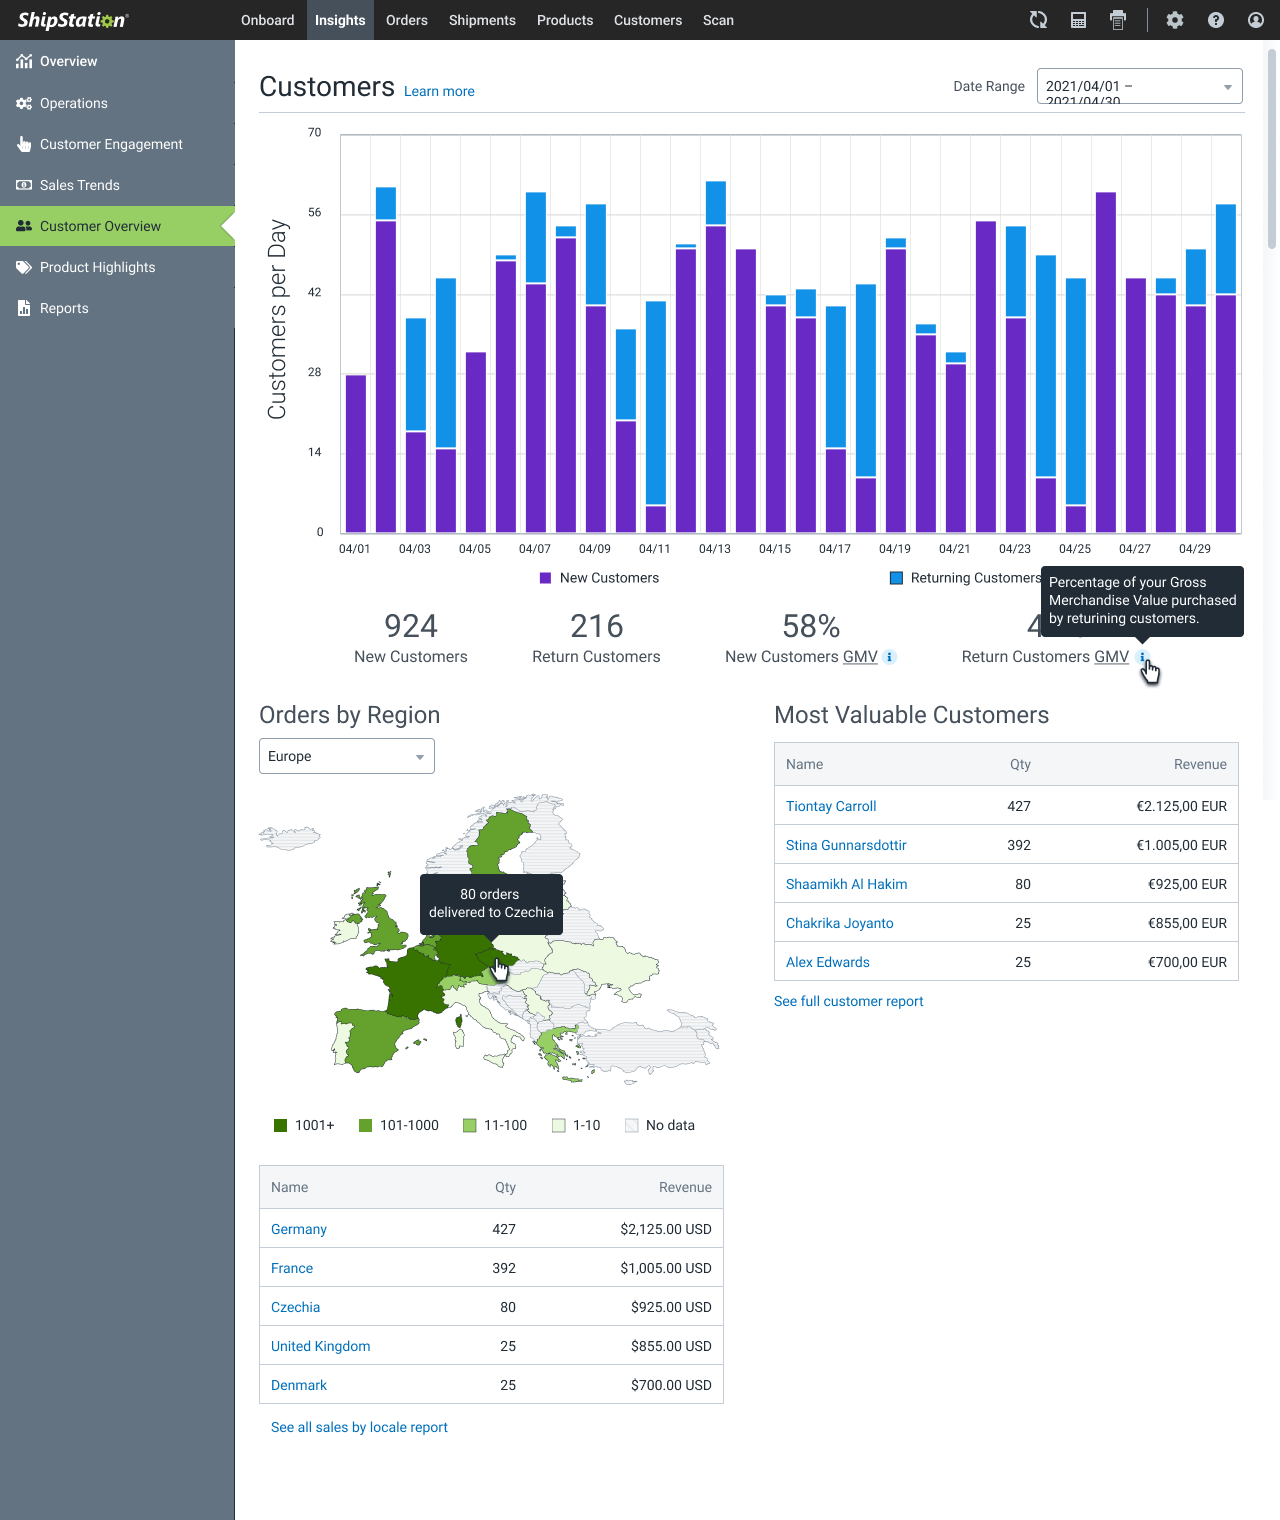 Customer Overview page with EU specific data visualization.